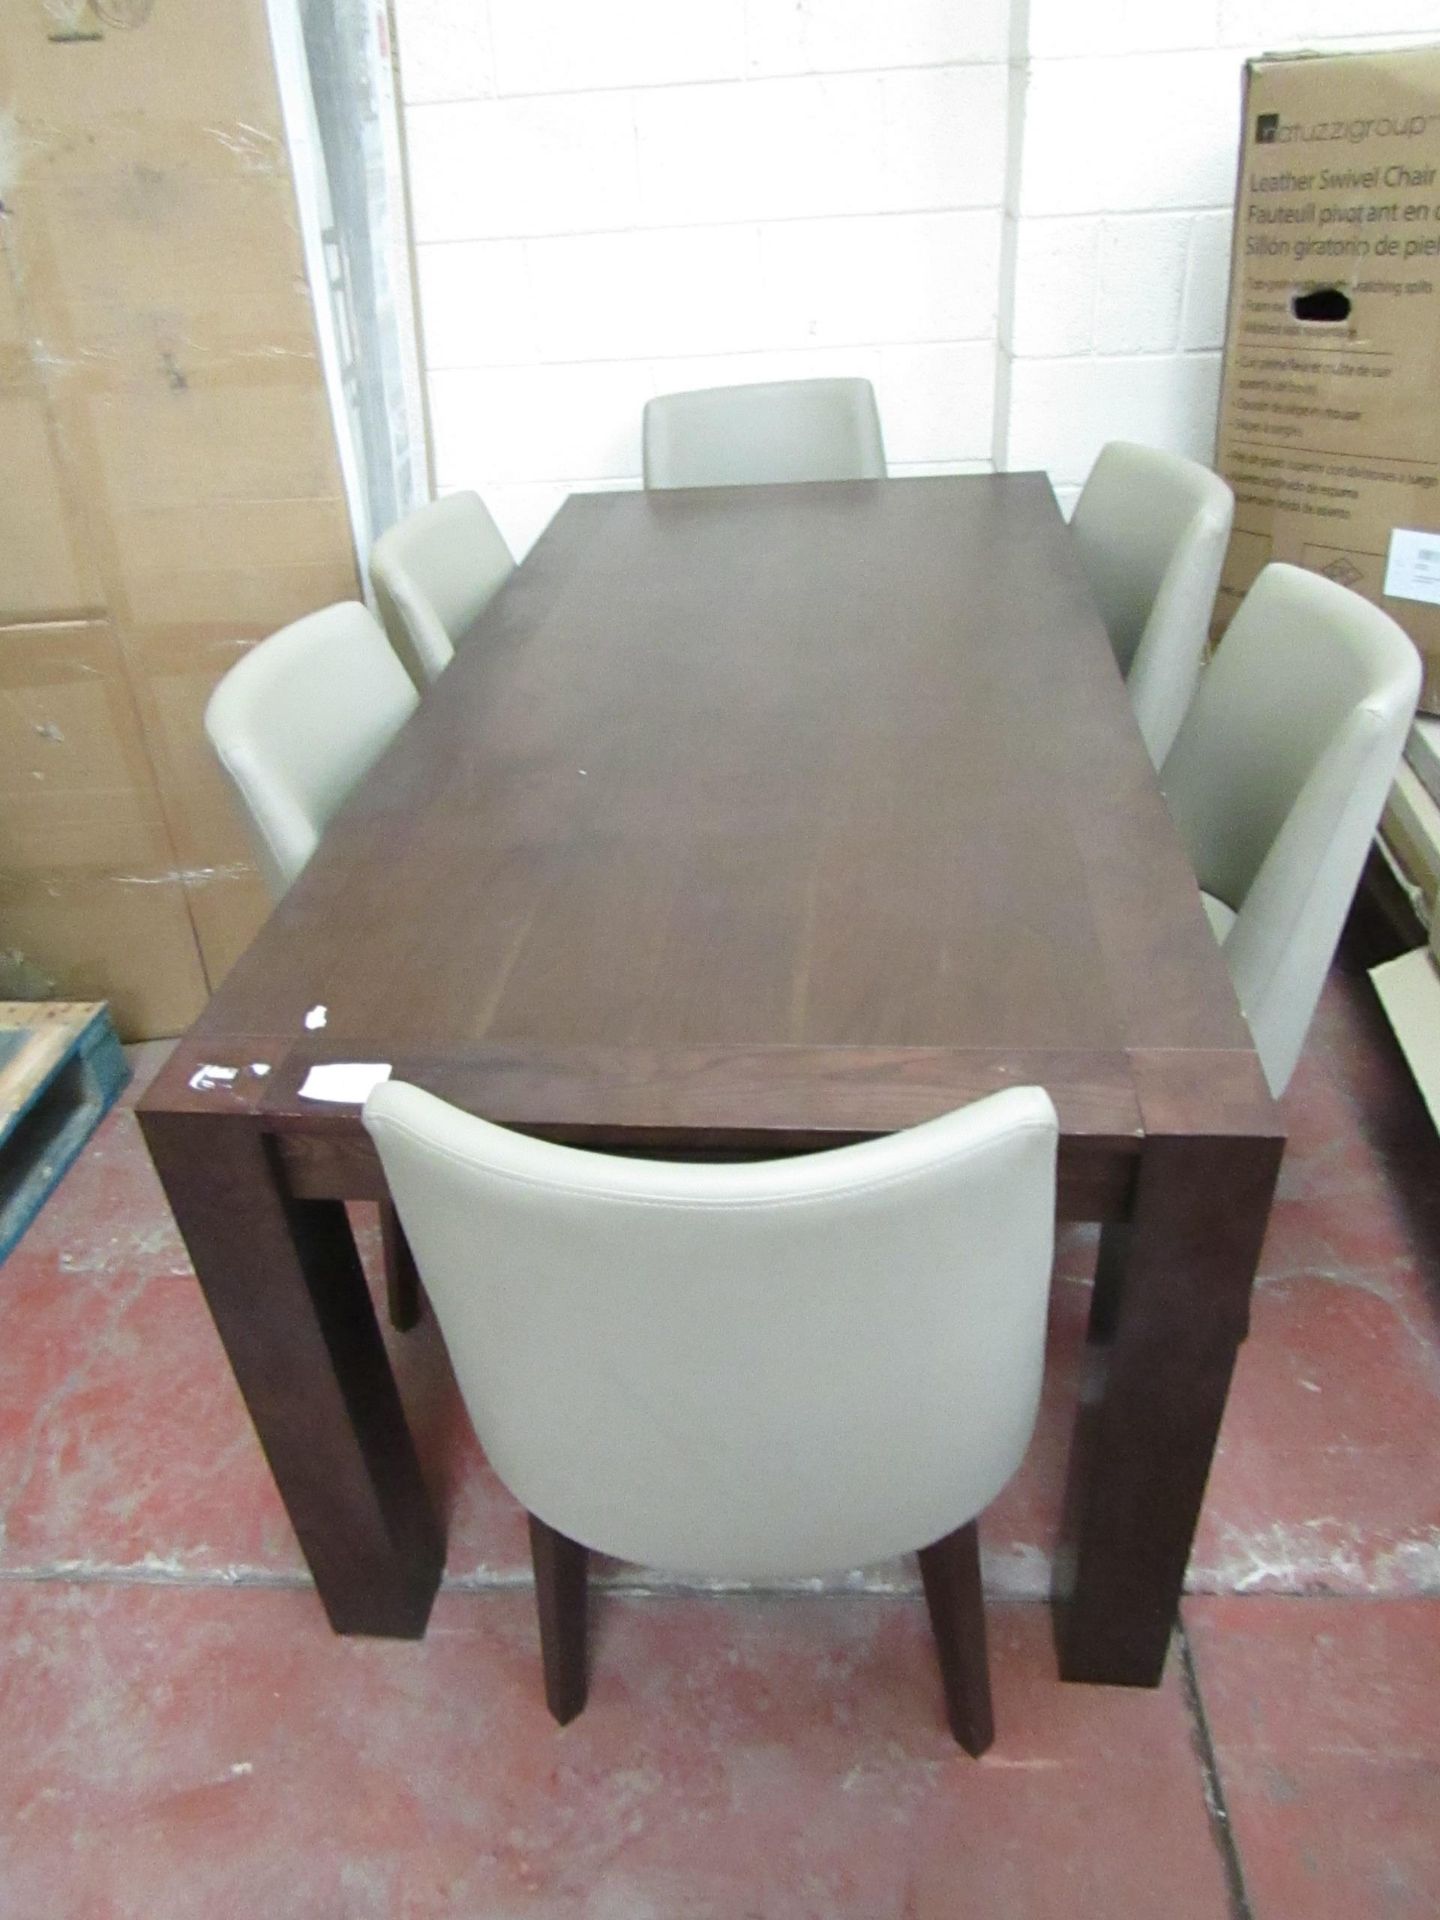 Dining table with 6 Chairs, a few if the chairs have some marks on them and the table has a few